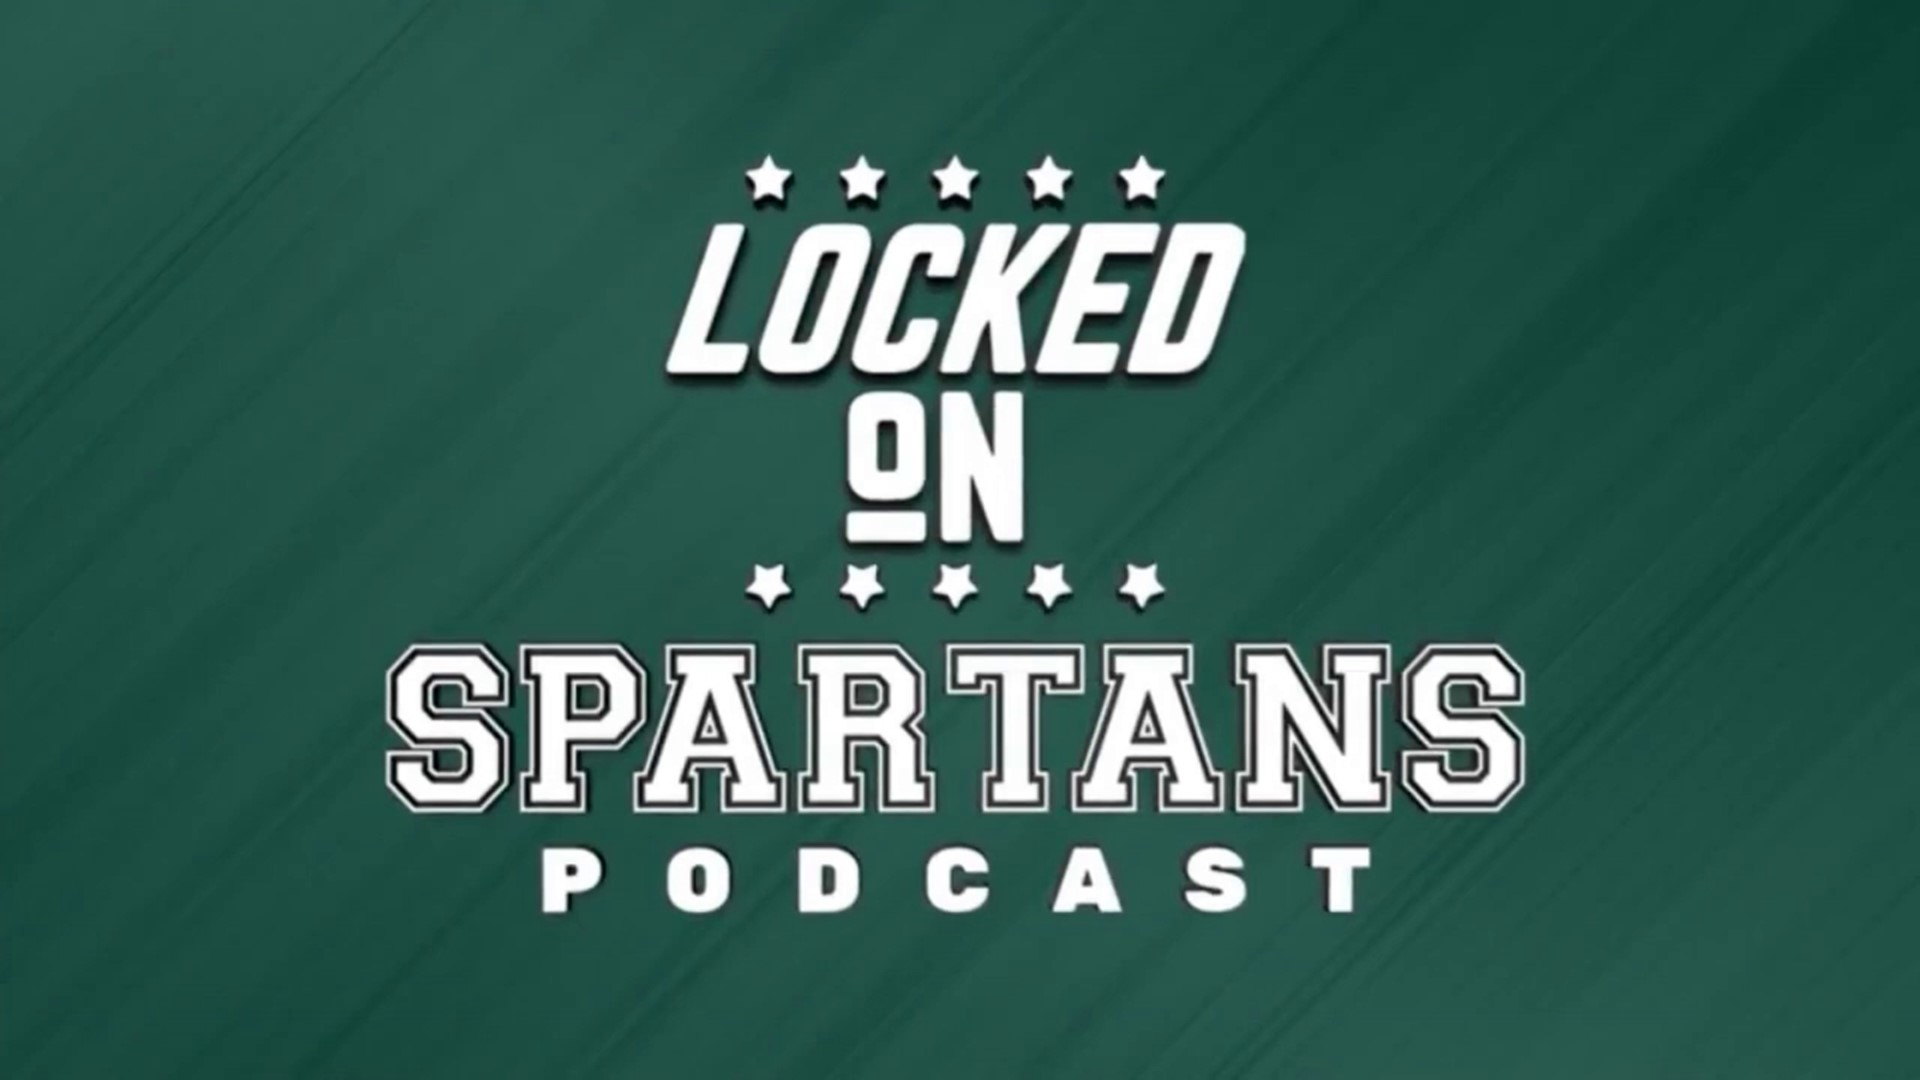 We are joined by Connor Muldowney for another riveting conversation about all things Michigan State football.